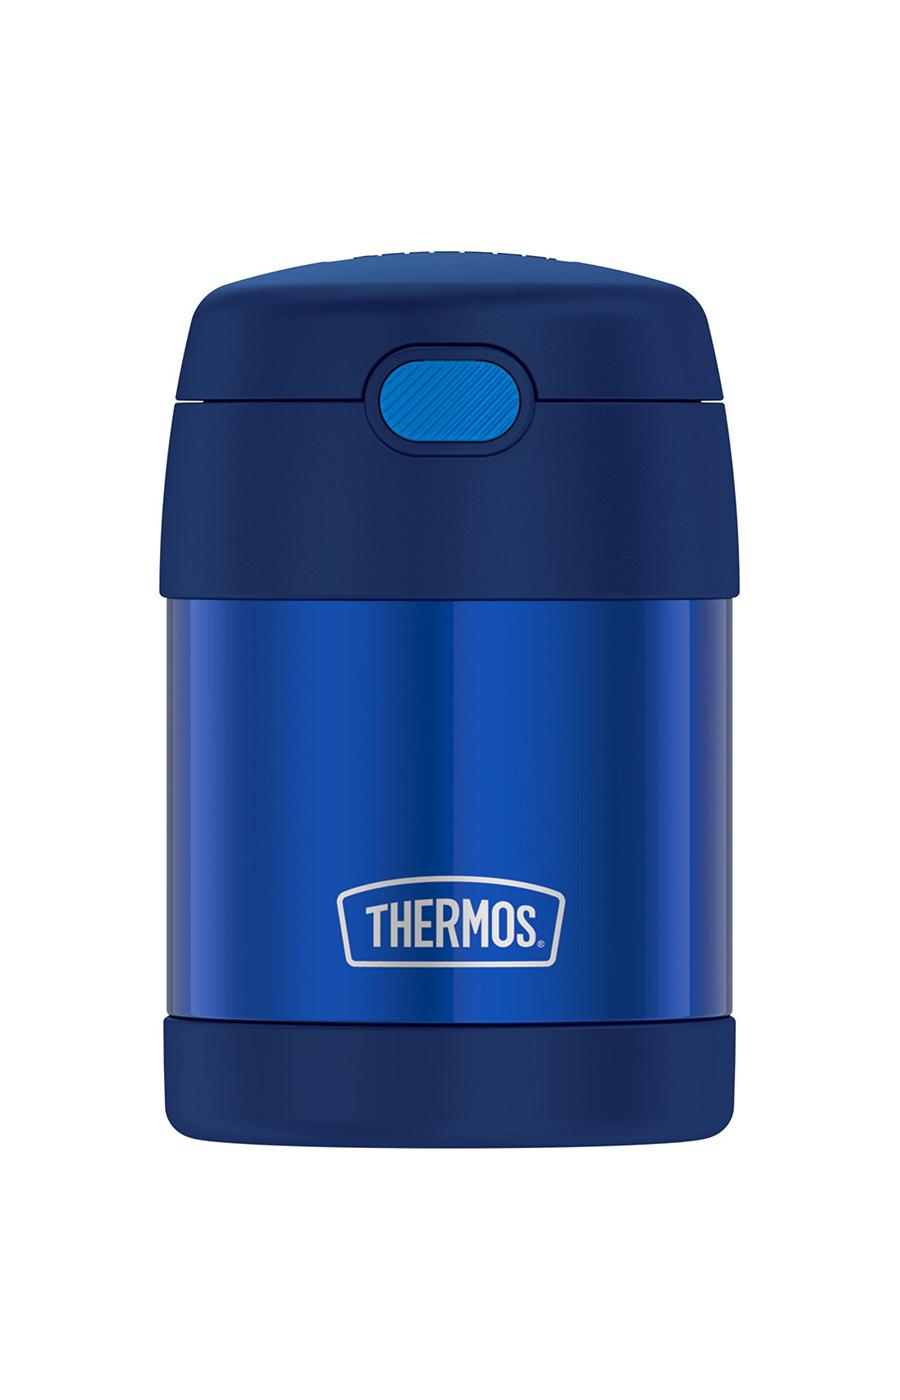 THERMOS FUNTAINER 10 Ounce Stainless Steel Vacuum Insulated Kids Food